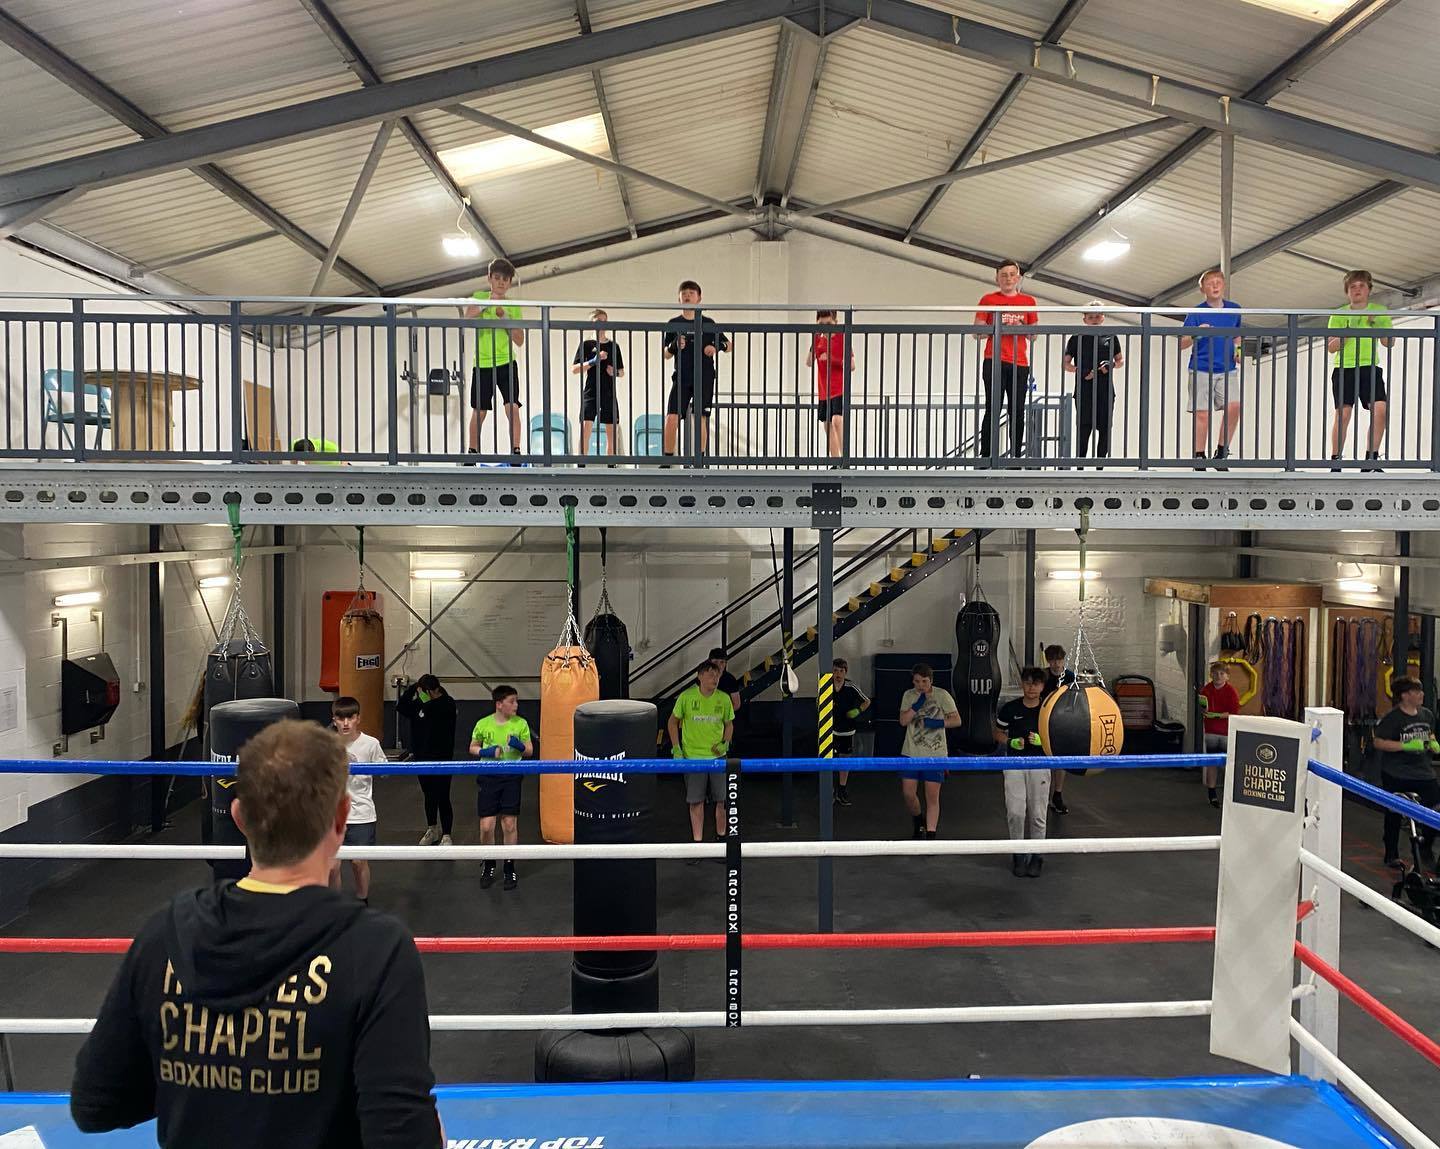 Sessions are already underway at Holmes Chapel Boxing Clubs brand-new gym at Station Yard